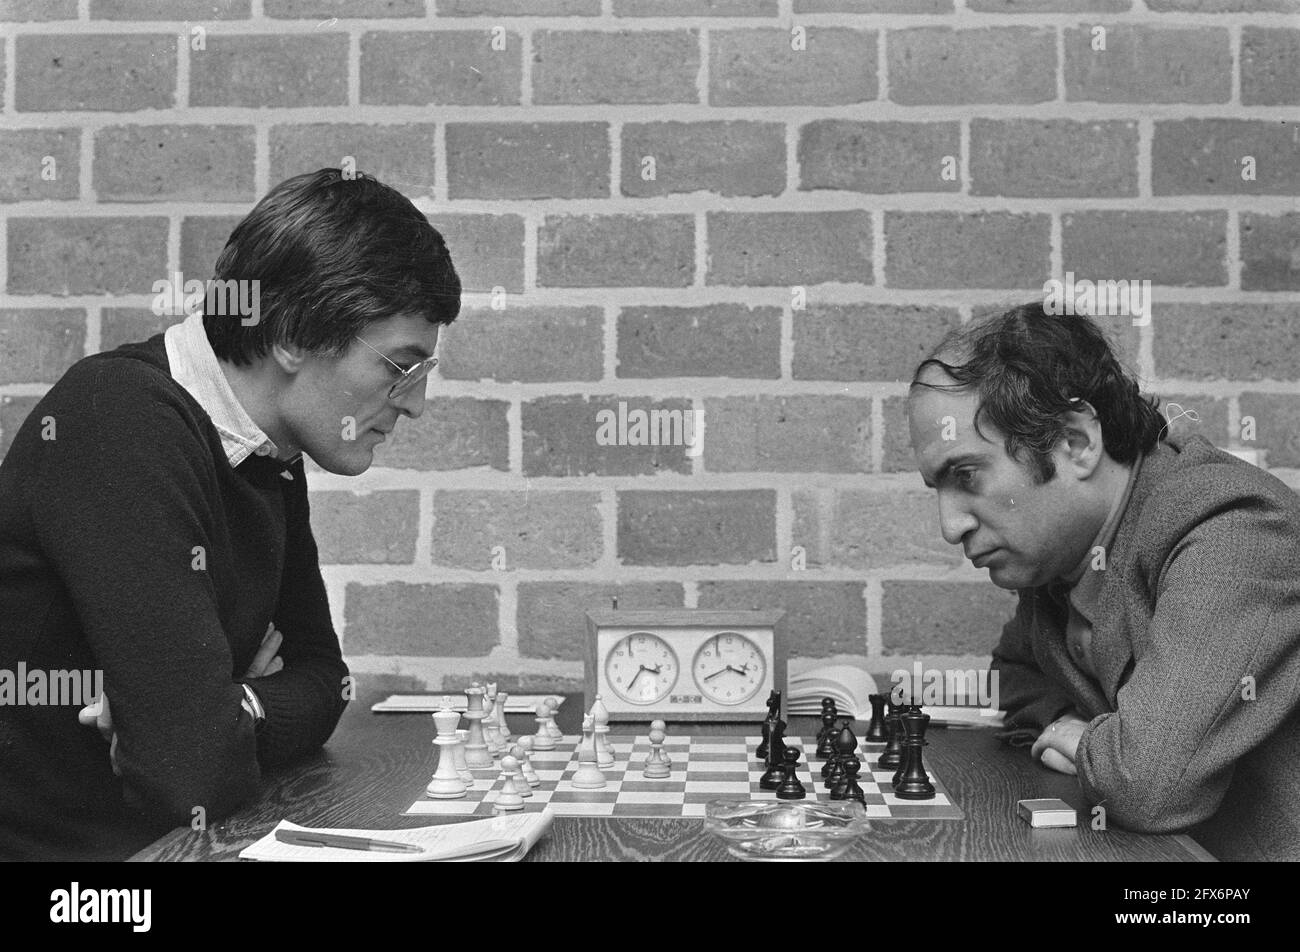 Tenth Interpolis Chess Tournament in Tilburg; A. Karpov (l) against V.  Korchnoi (r), October 21, 1986, chess, tournaments, The Netherlands, 20th  century press agency photo, news to remember, documentary, historic  photography 1945-1990